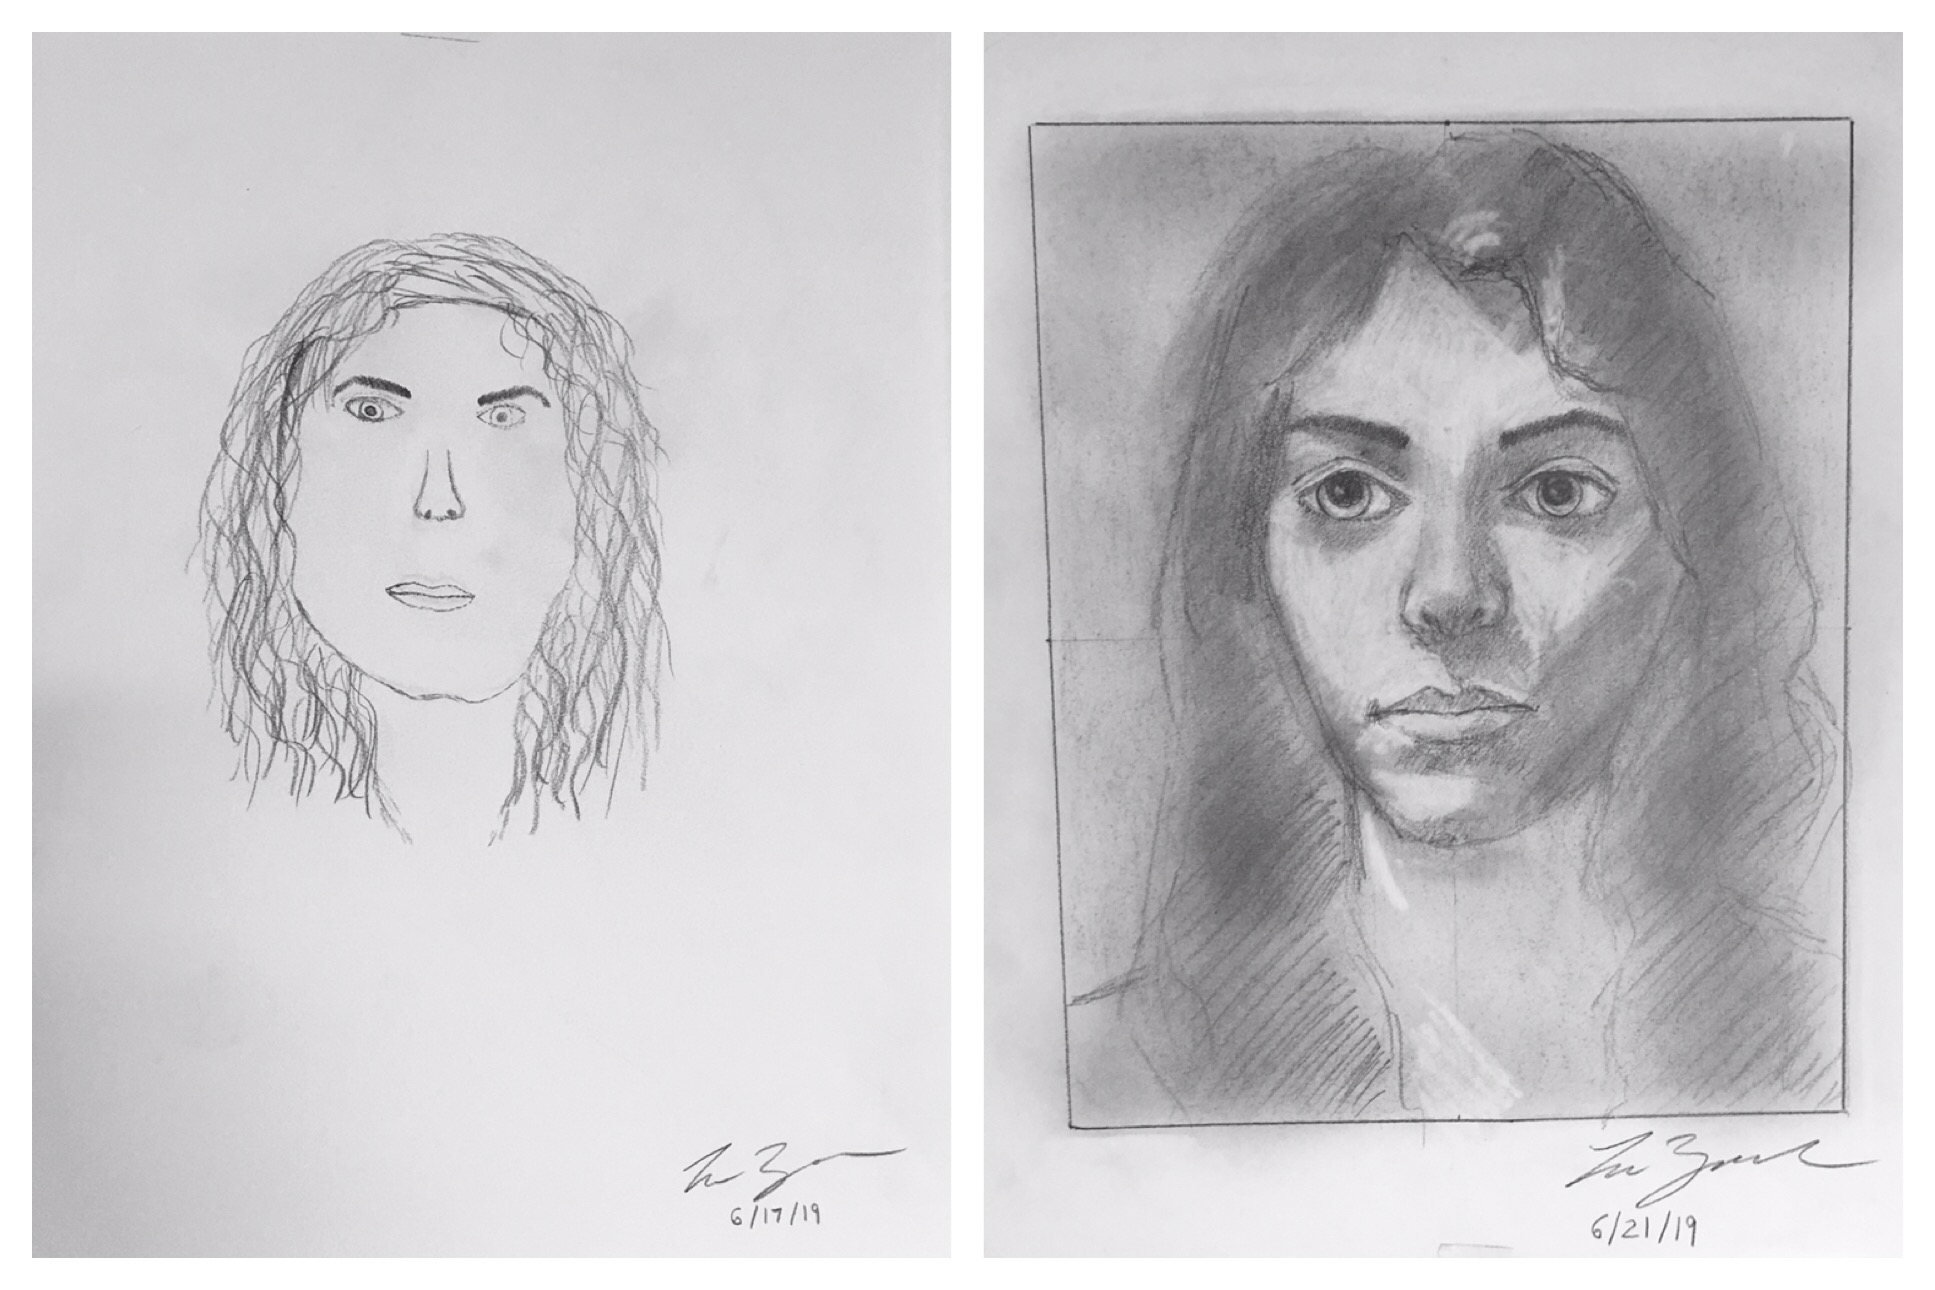 Lena's Before and After Self-Portraits June 2019